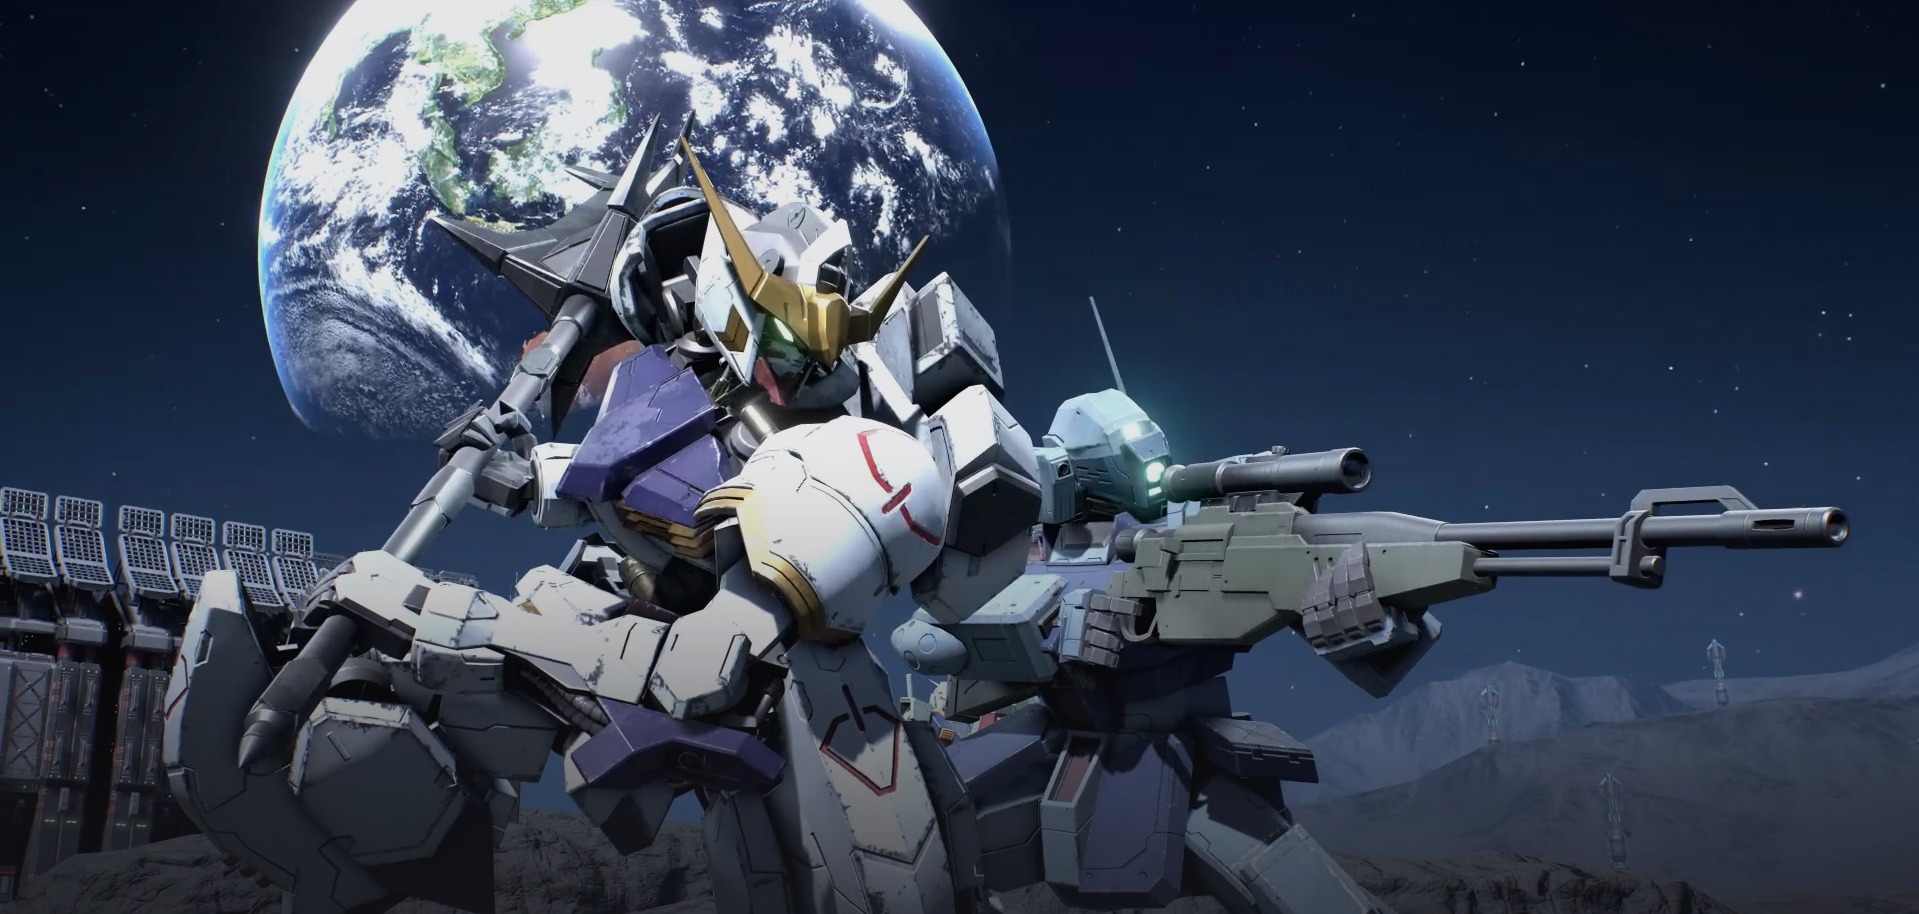 In this article, we covered the new game Gundam Evolution, an Overwatch clone as some say, how you can play it, and its release date.